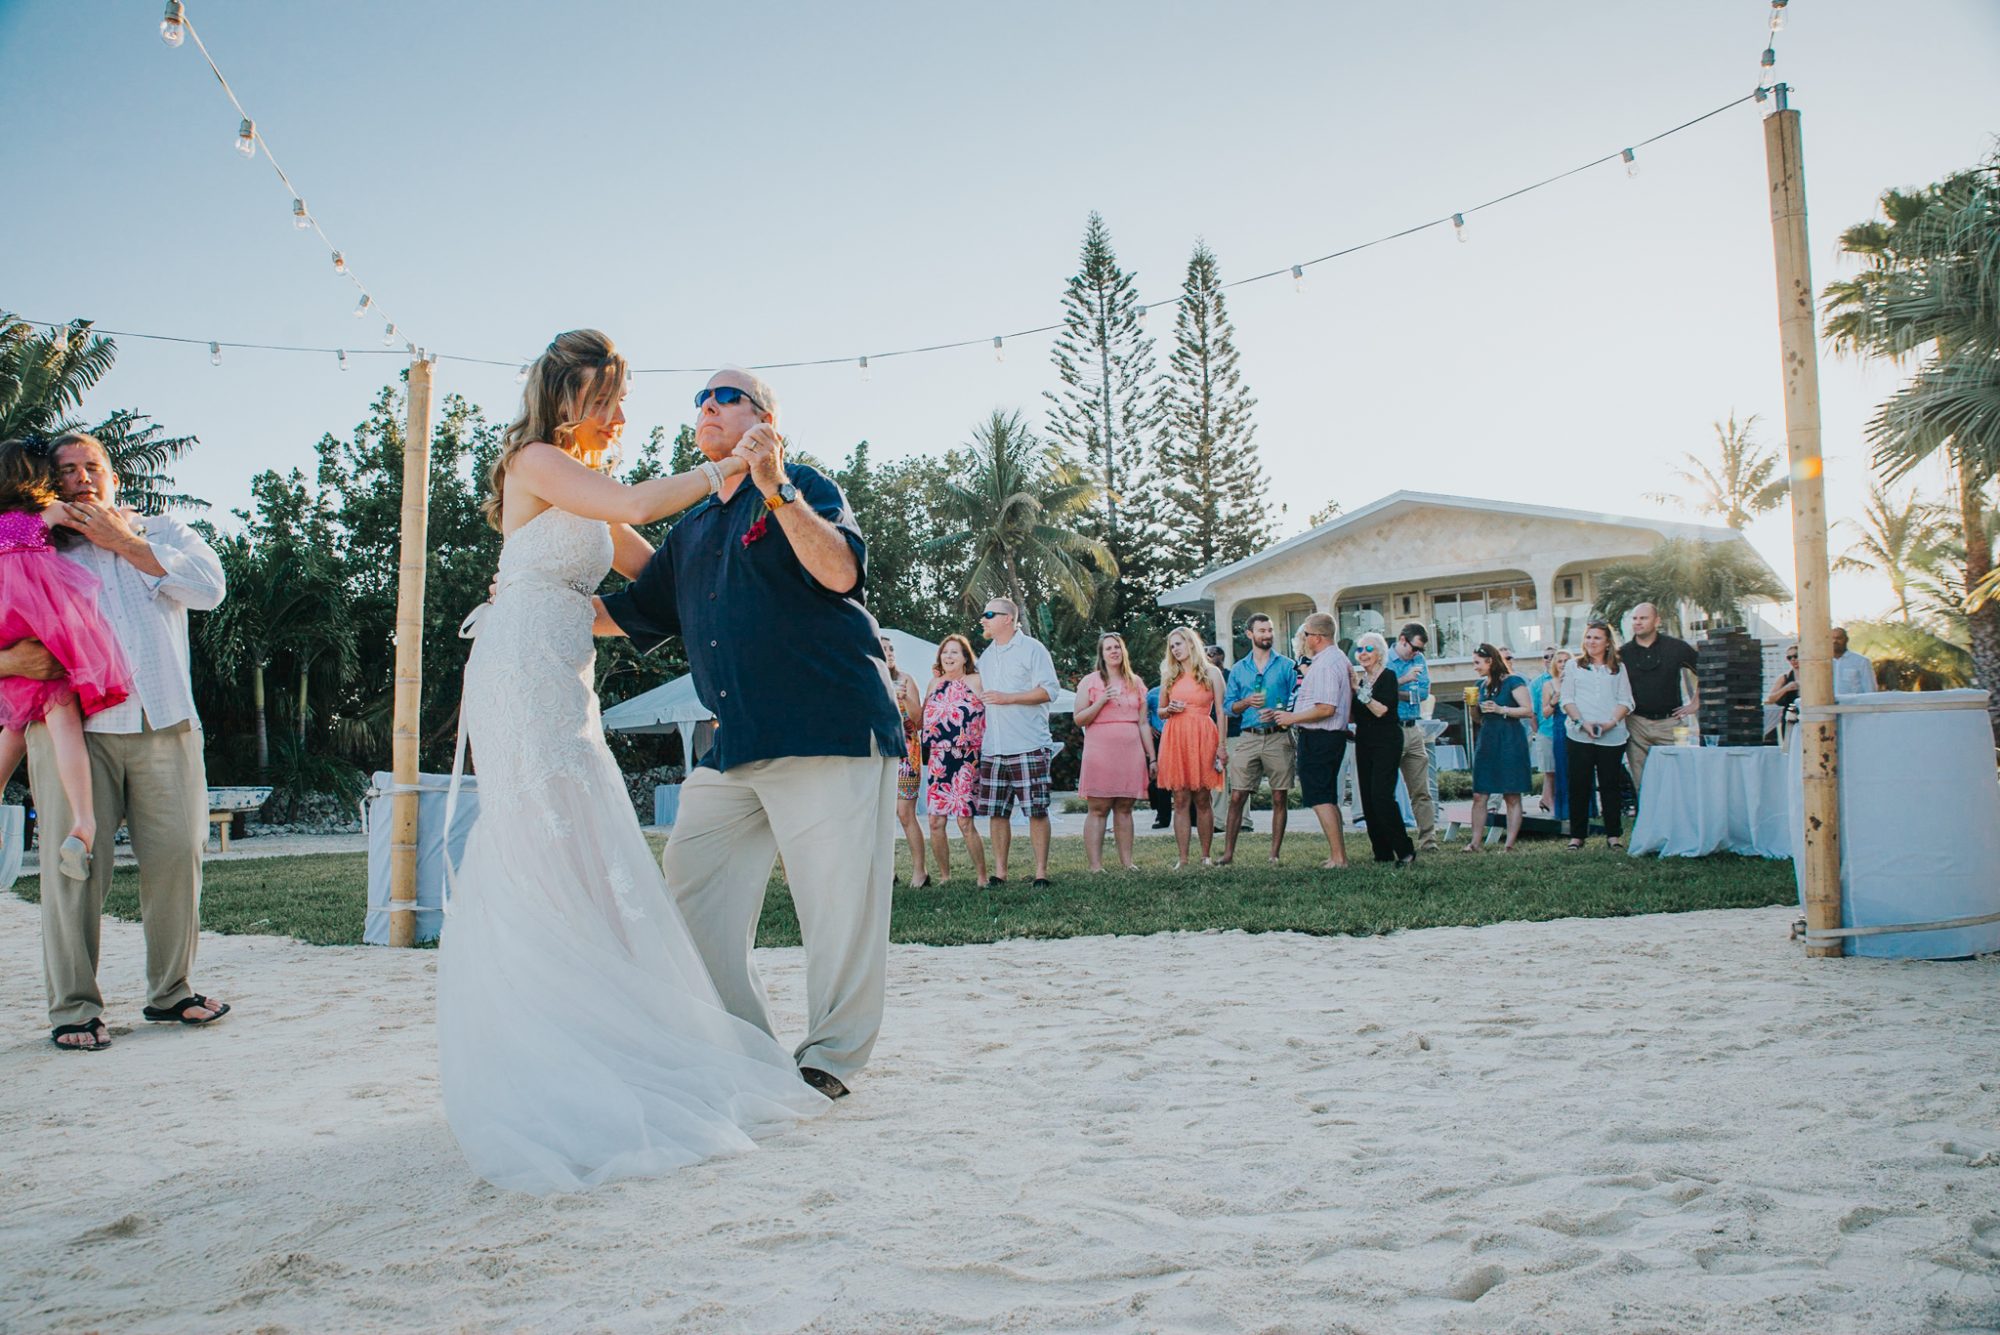 A bride and groom having a destination wedding in the Florida Keys, dancing on the beach.